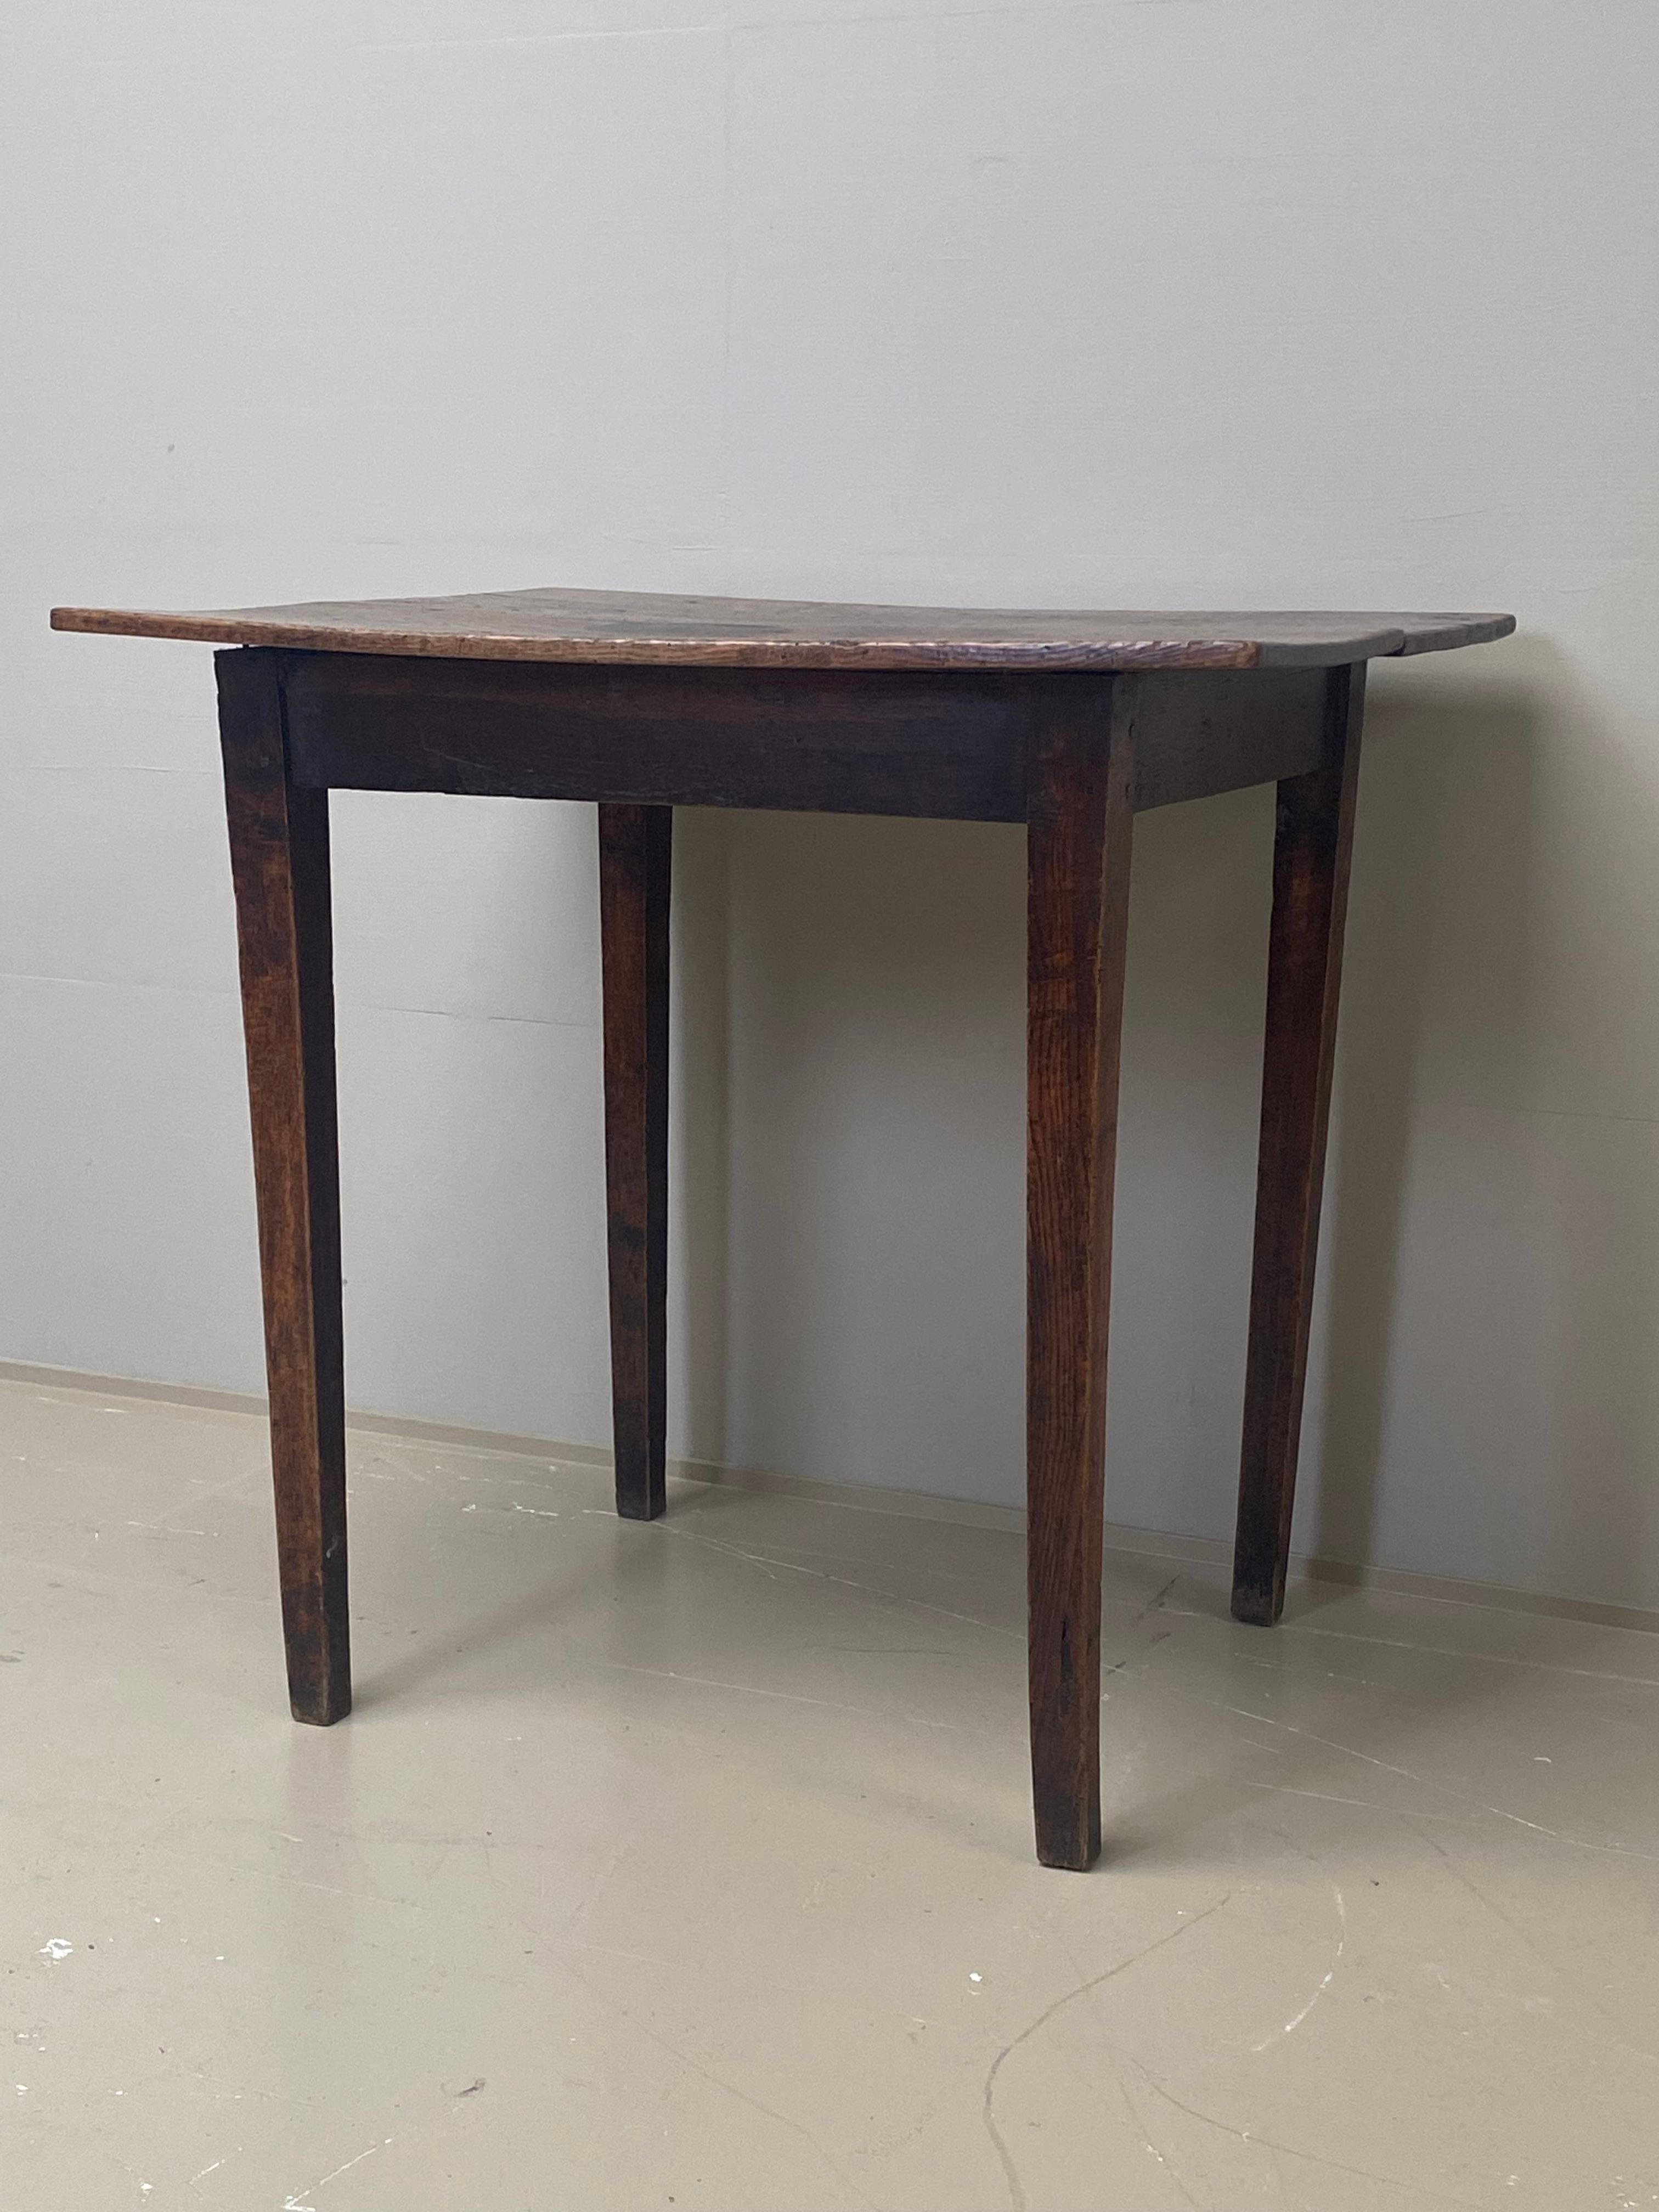 Antique English Ash and Elm Rectangular Small Side Table In Good Condition For Sale In Schellebelle, BE